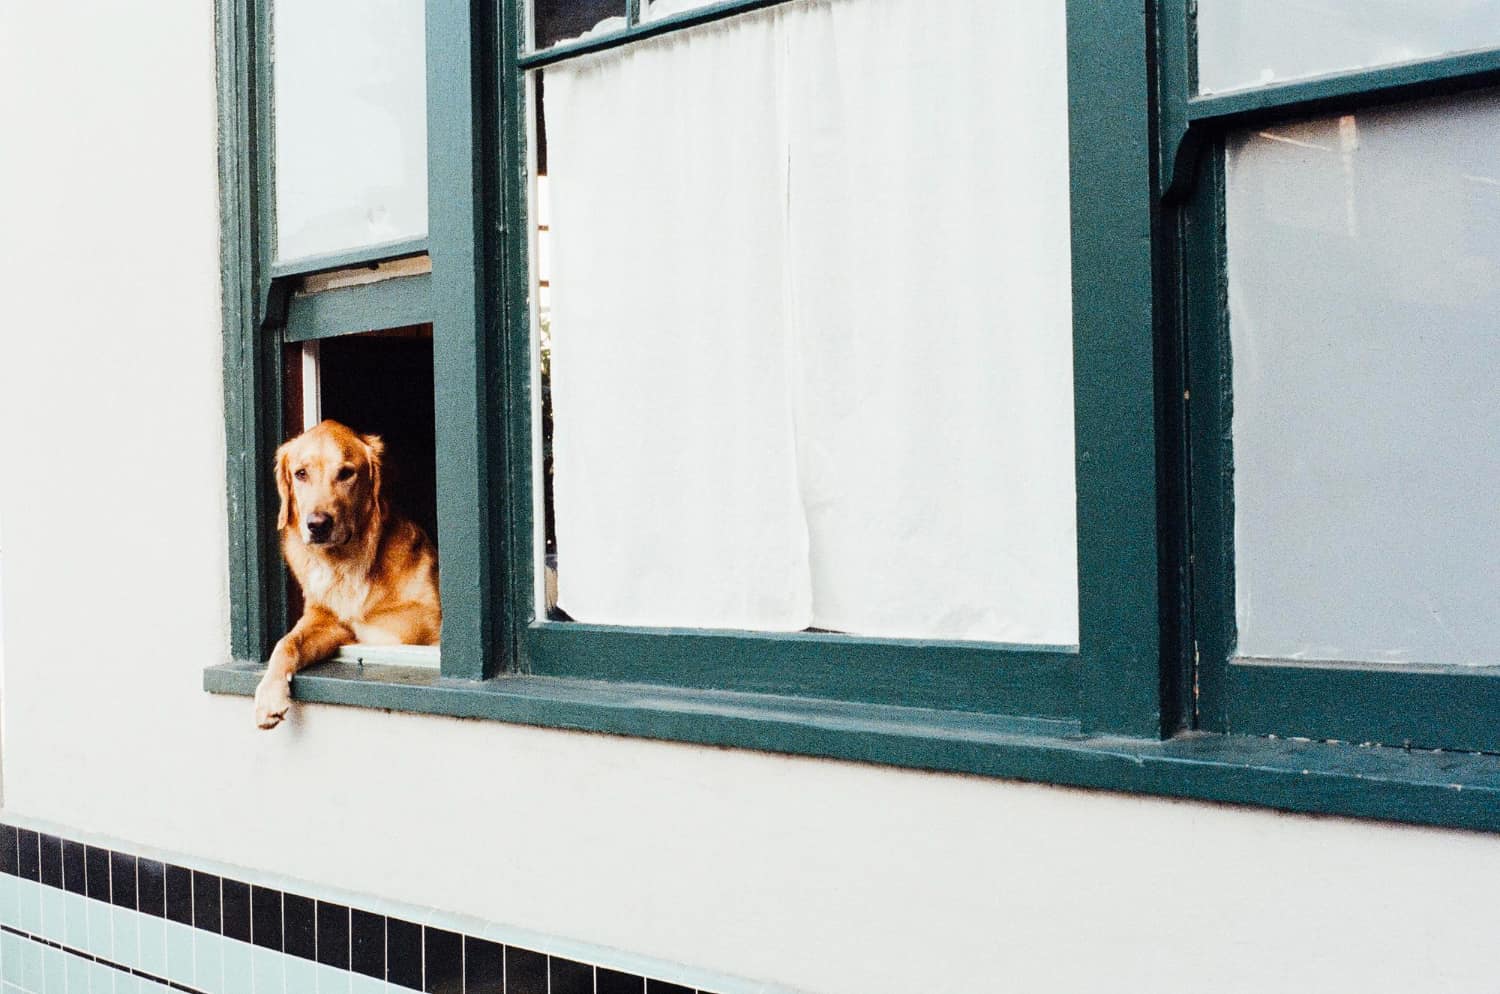 A golden retriever sits at an open window, pictured from outside the house. The aged wooden window frame is painted emerald green and has white curtains hanging inside.